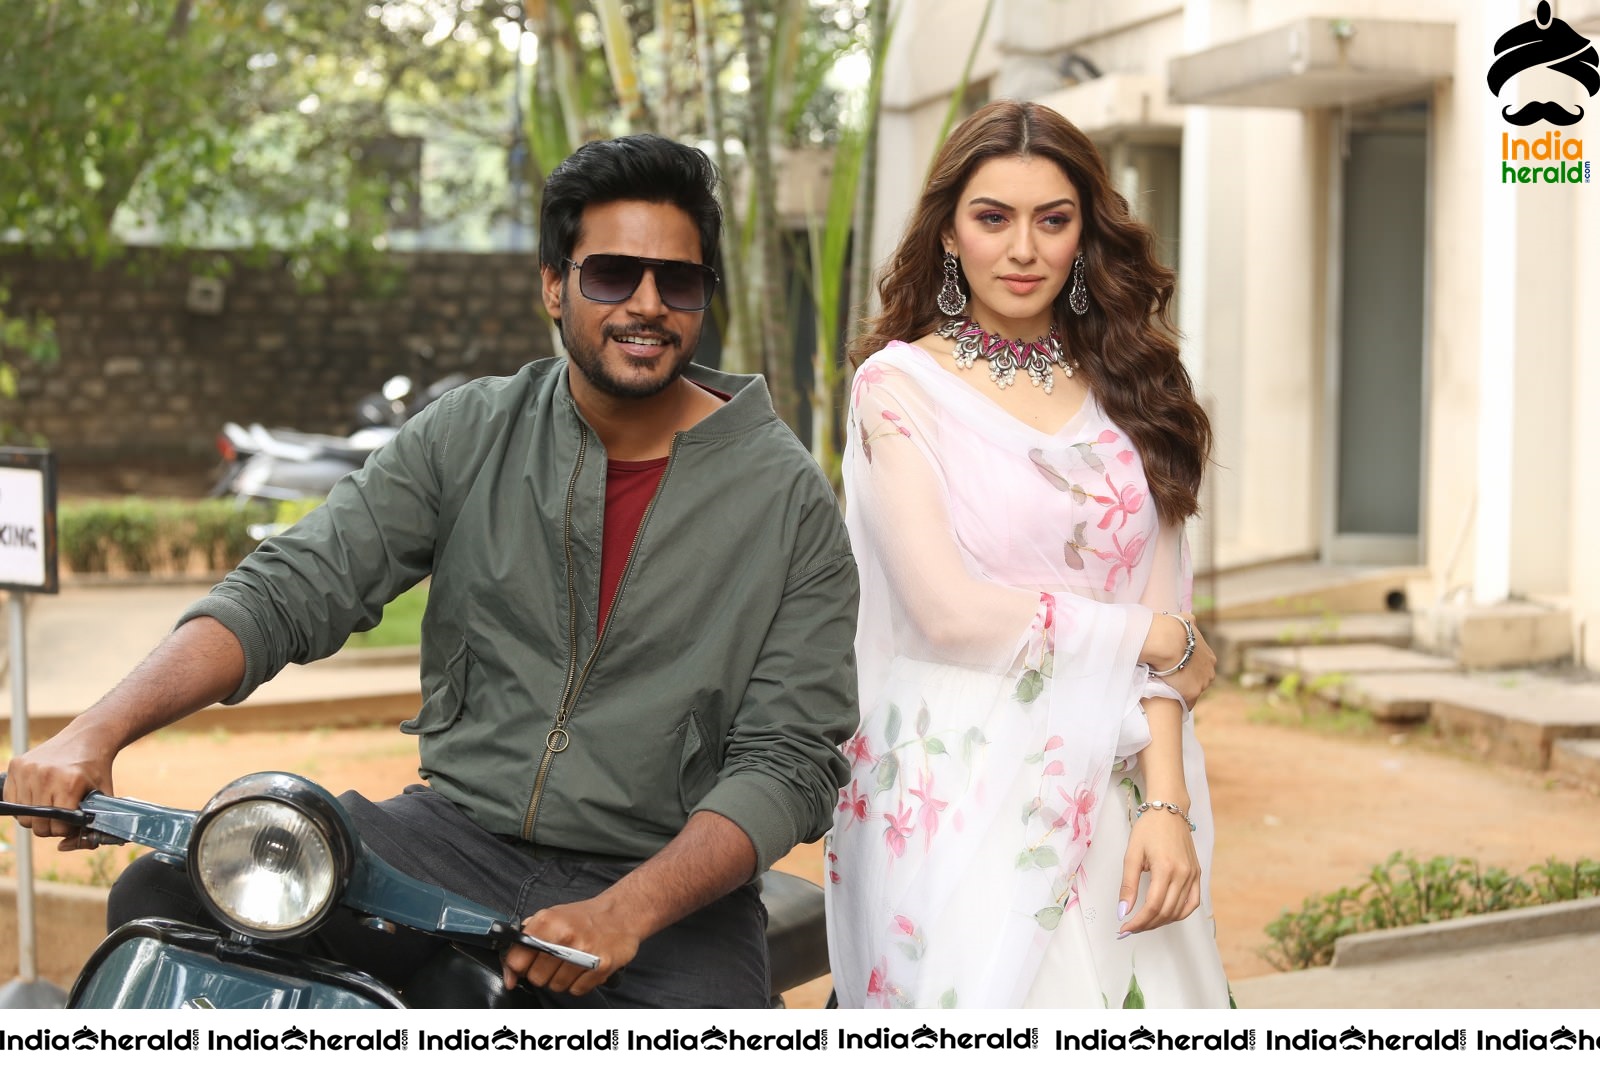 Actor Sundeep Kishan takes Photos along with Hansika sitting behind him in a Scooter Set 1